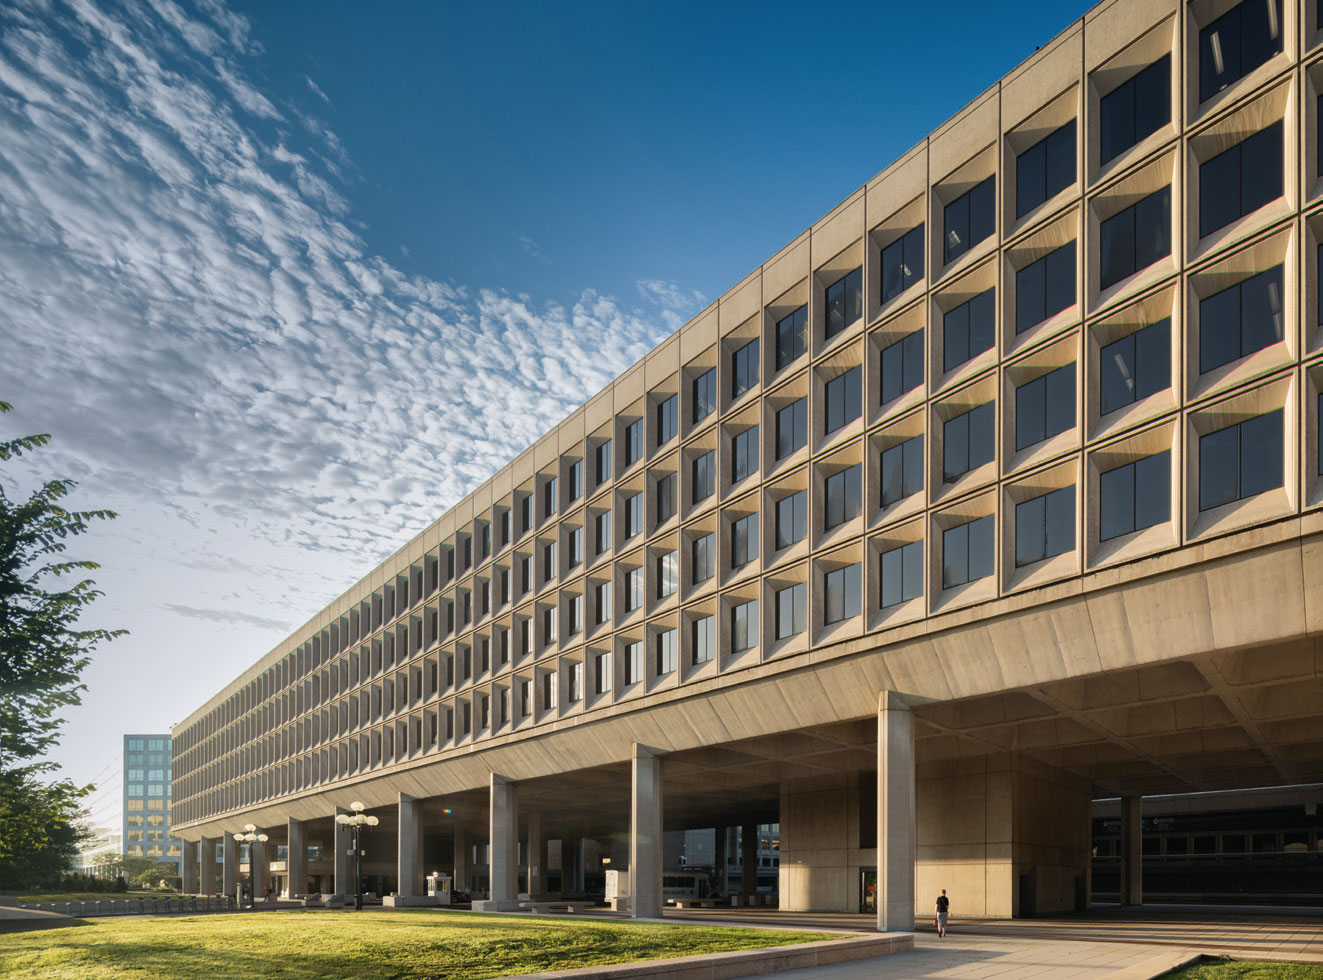 The J. Edgar Hoover Building, Washington D.C.. All photographs by Darren Bradley and reproduced in our new Mid-Century Modern Architecture Travel Guide: East Coast USA